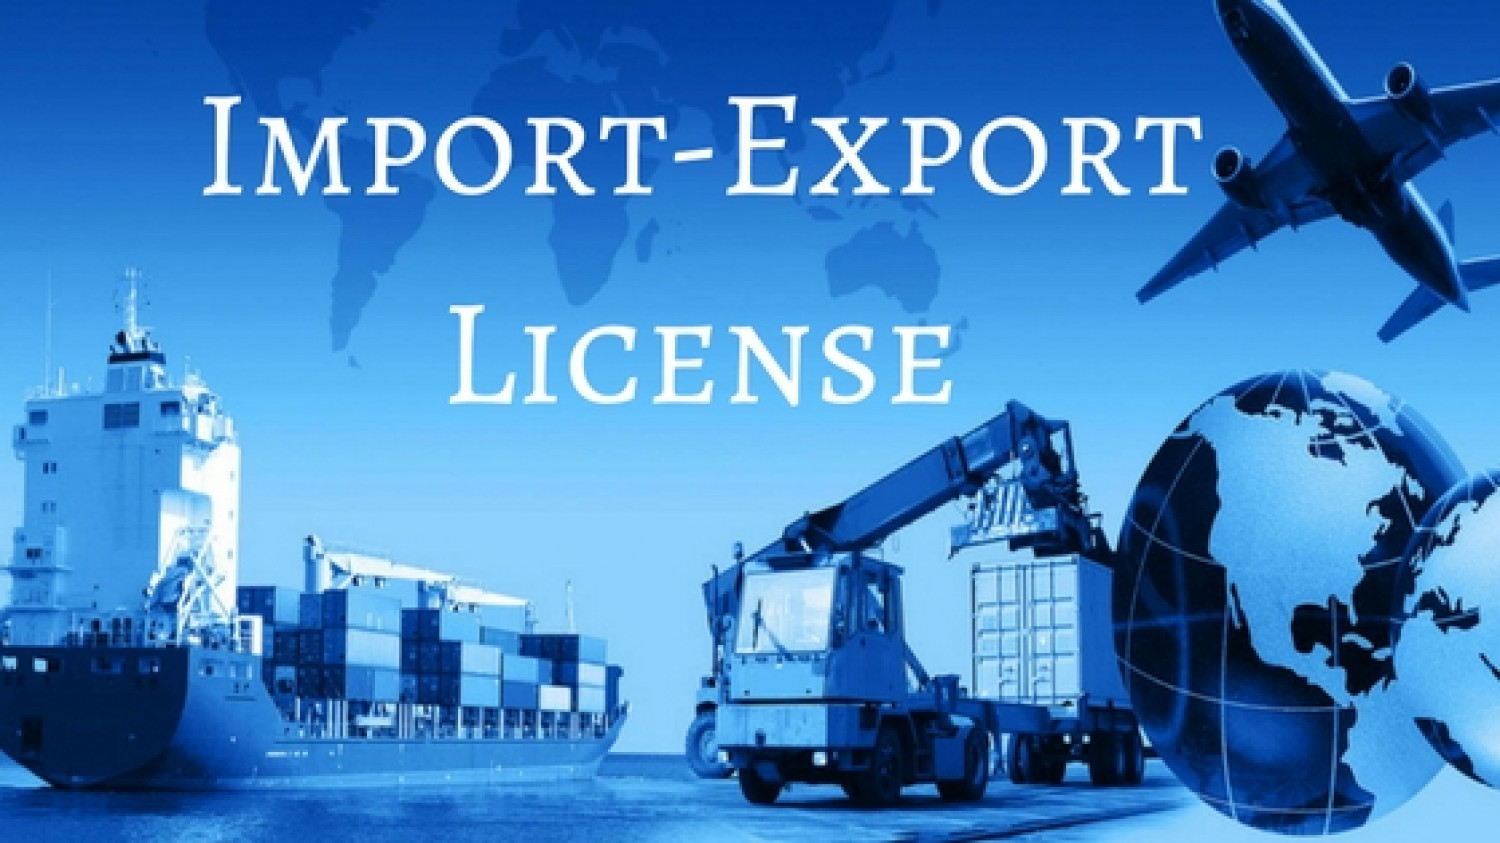  Import export license in India Infographic